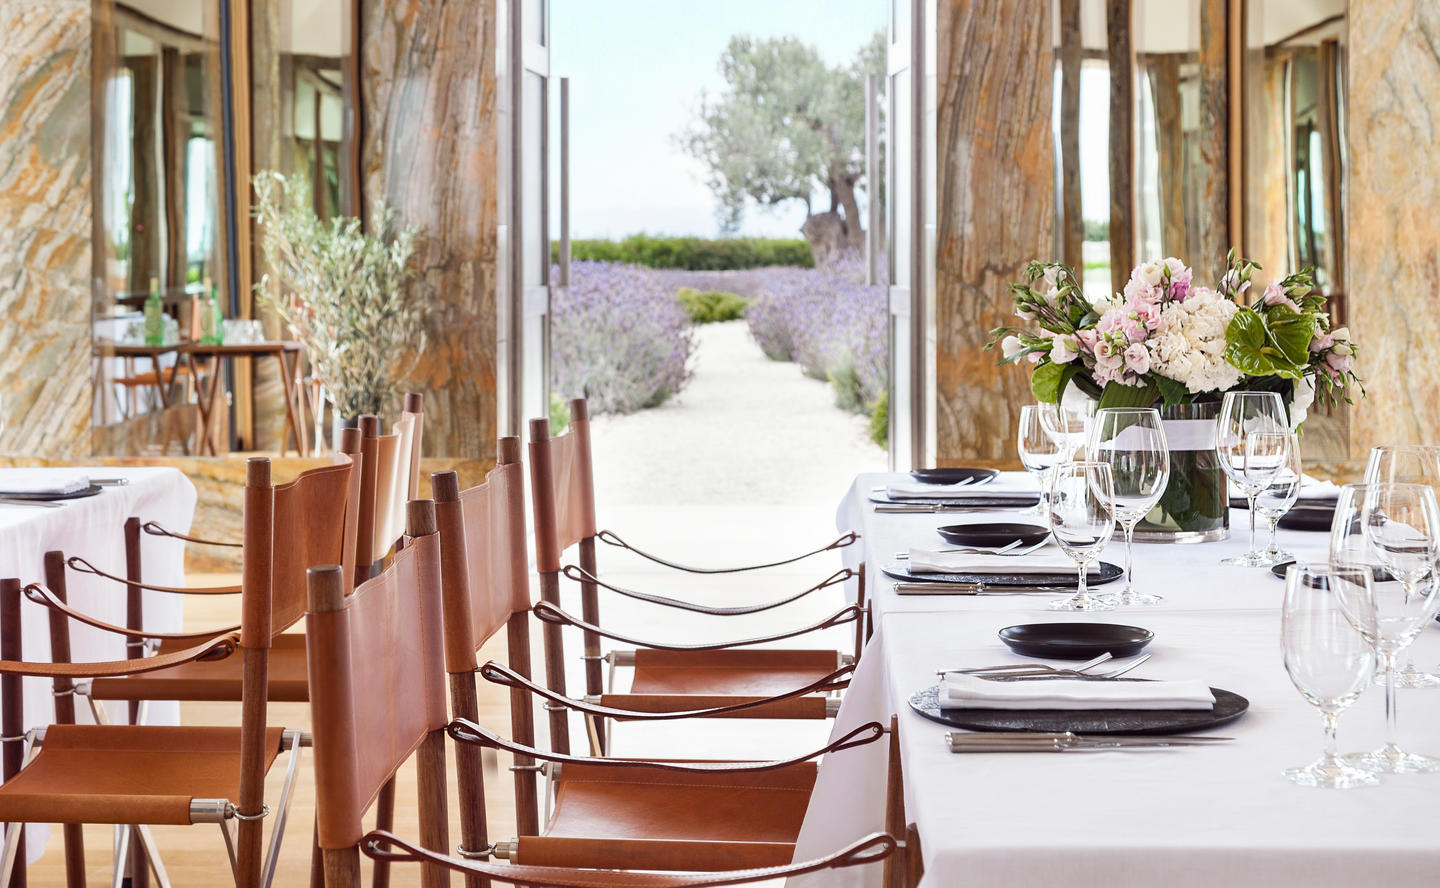 Amanzoe, celebrations and events, table setting